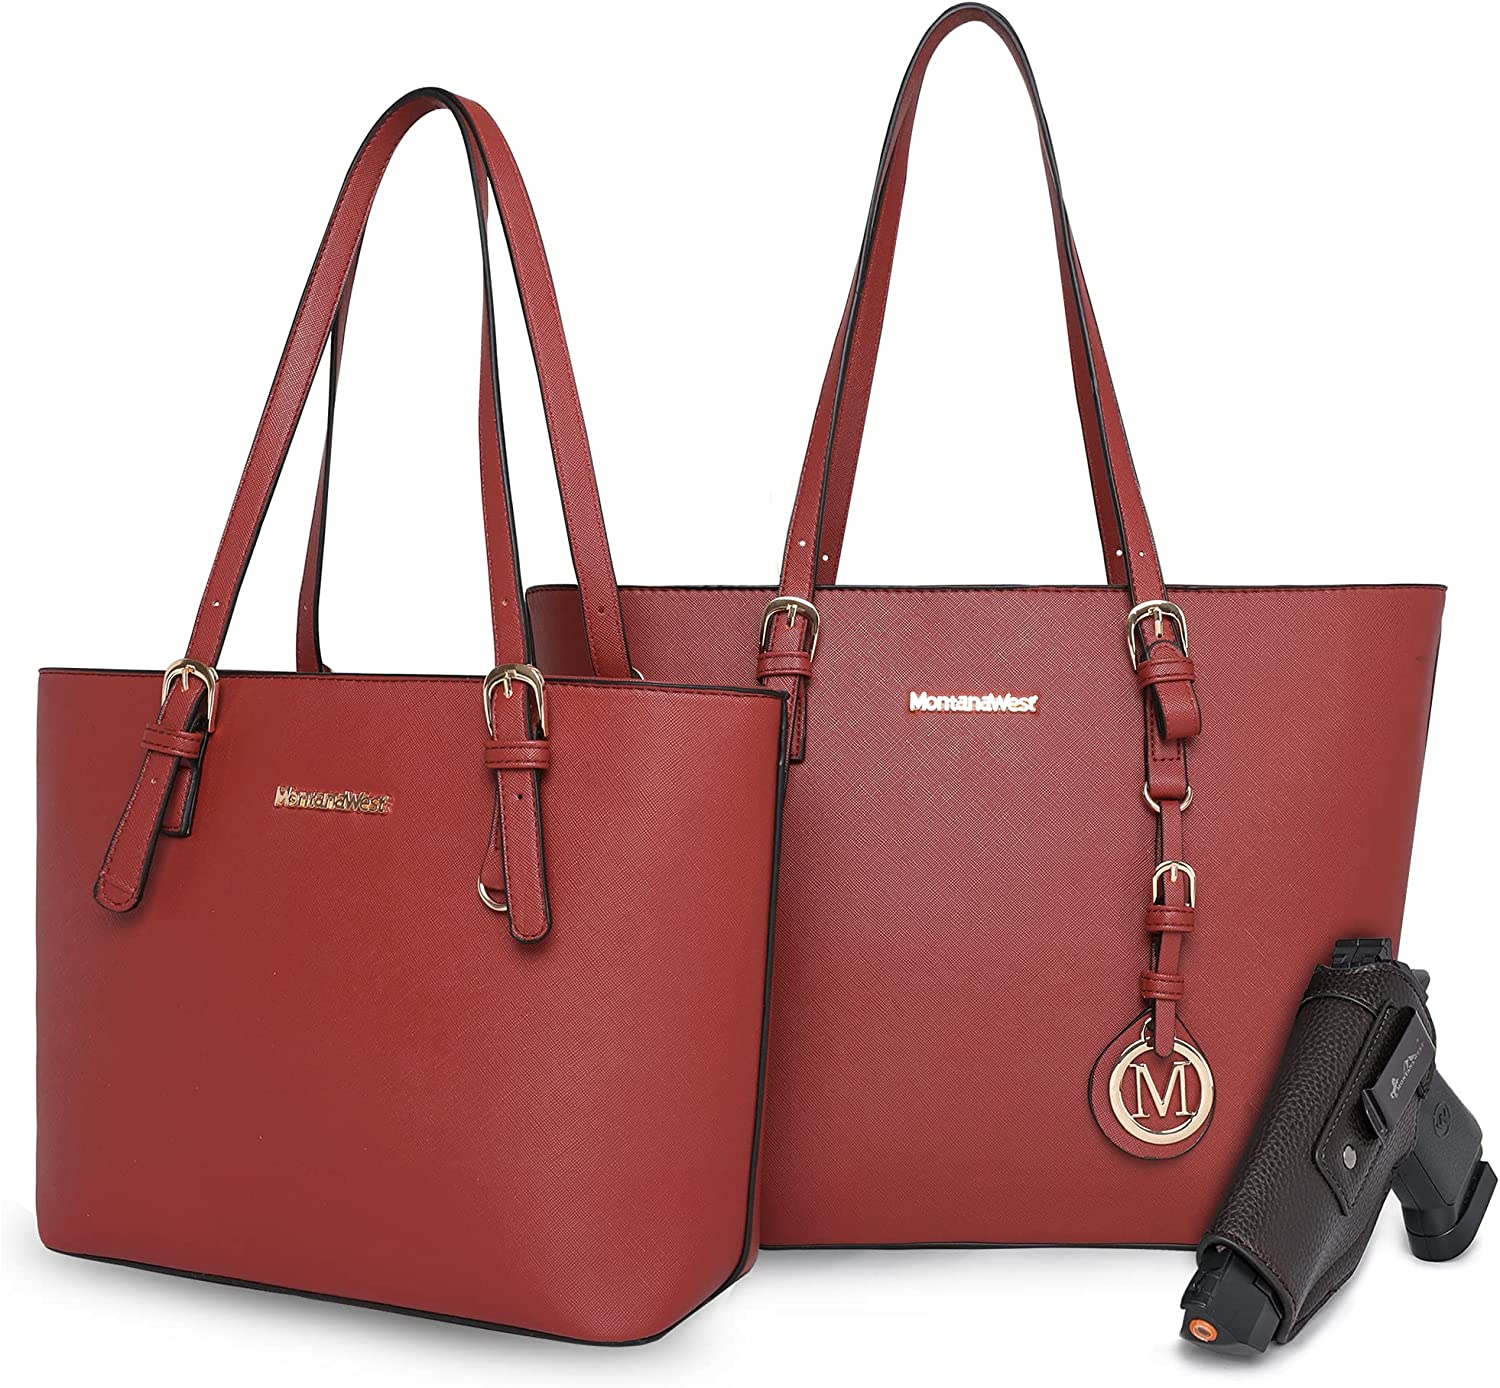 Concealed Carry Handbags: Fashion Meets Function? - The Truth About Guns